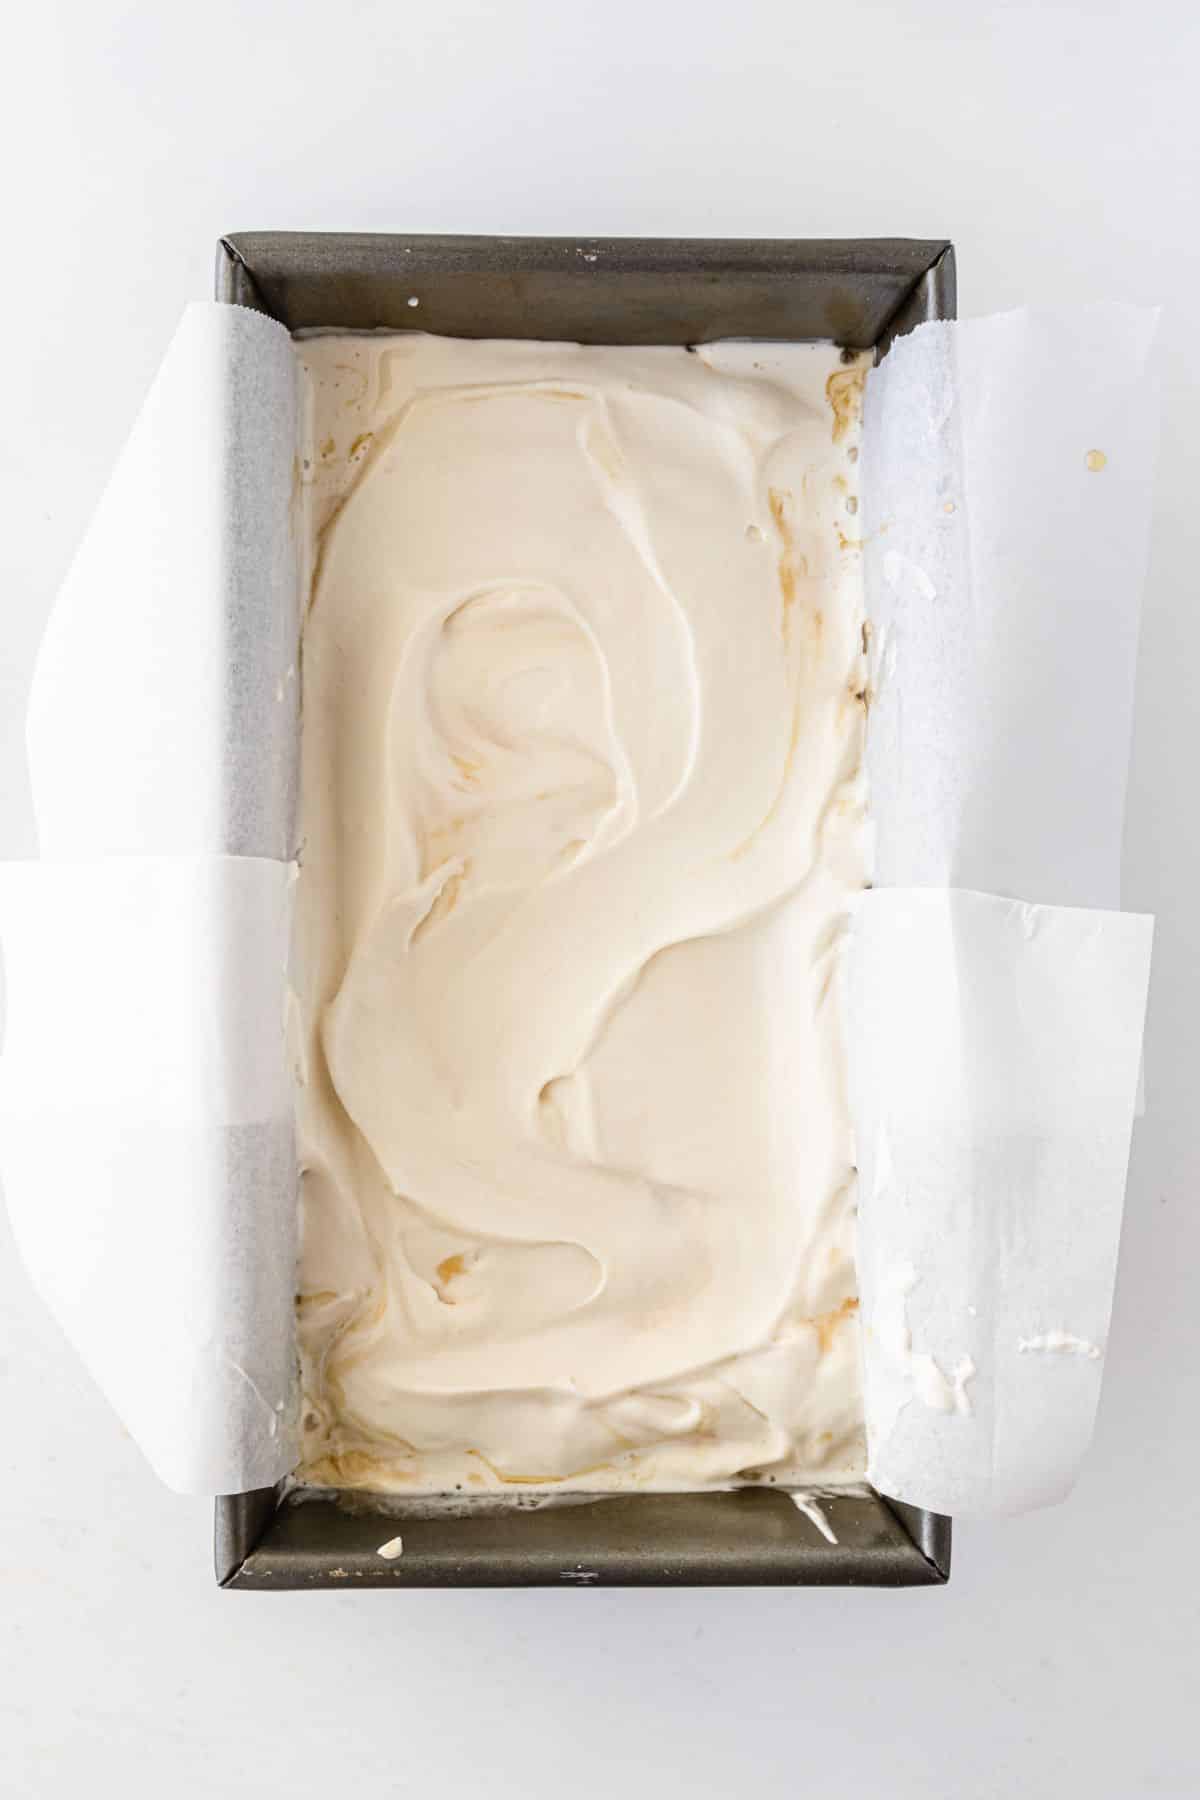 ice cream and parchment paper in a loaf pan